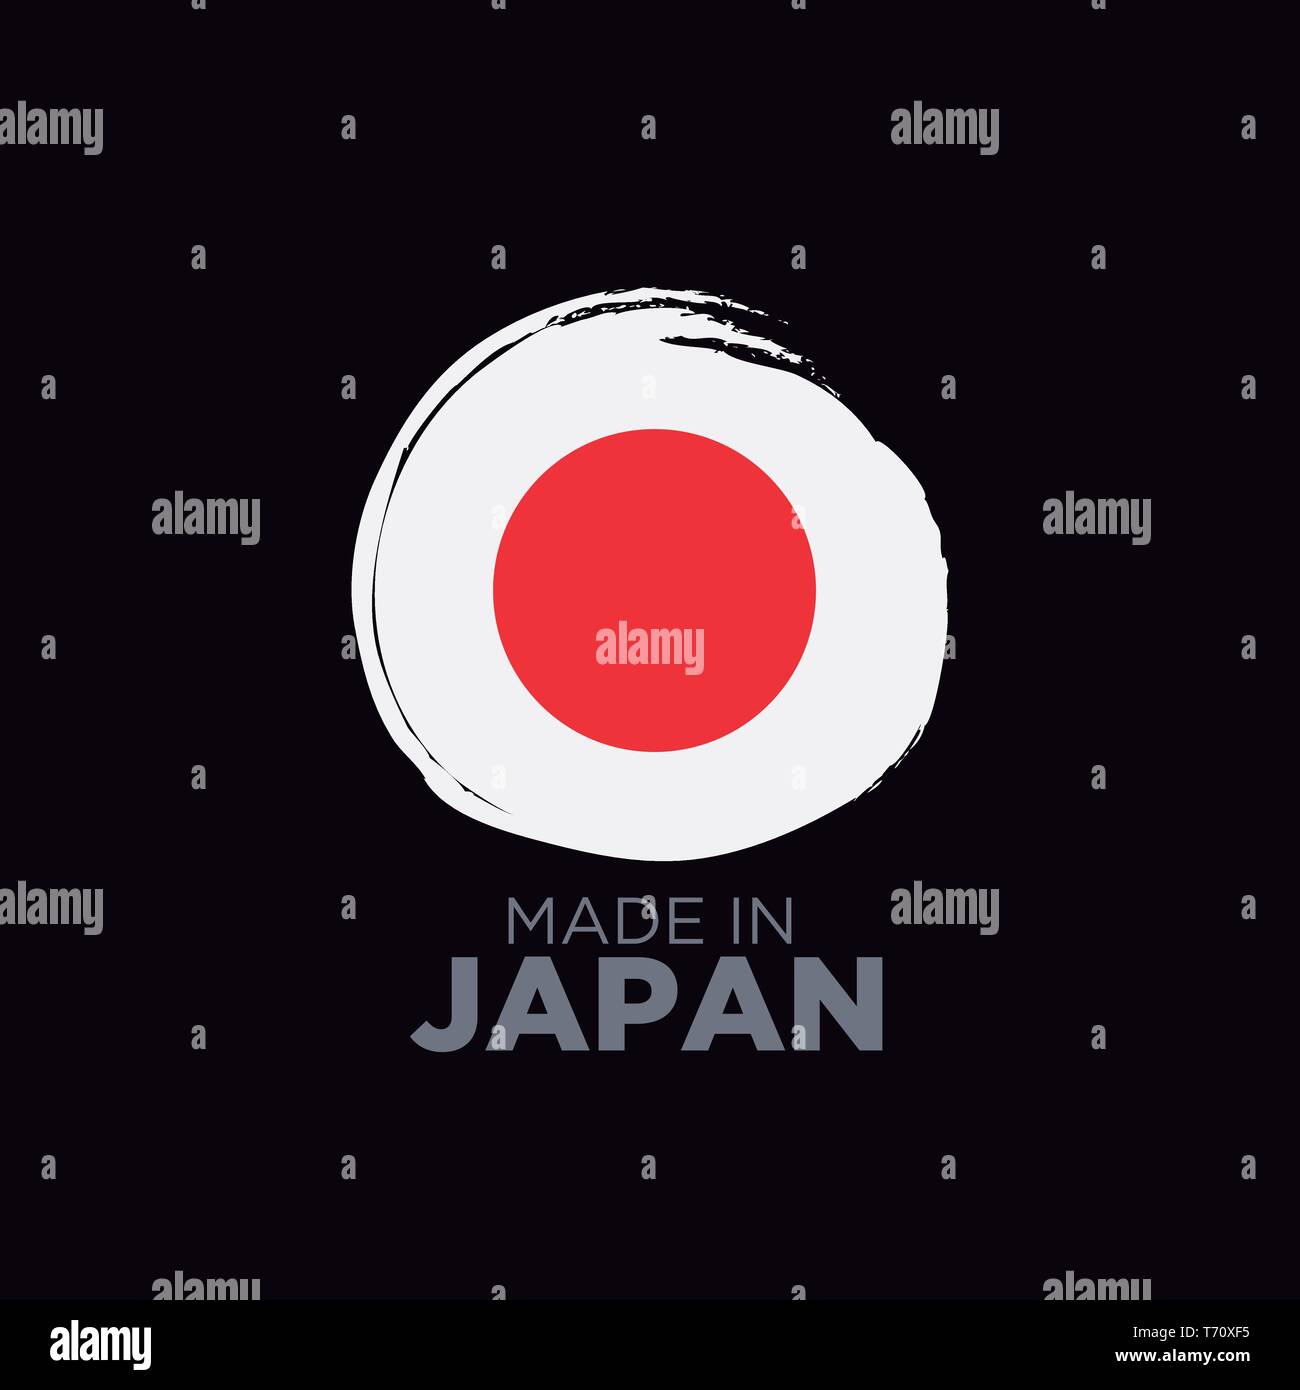 MADE IN JAPAN Stock Vector